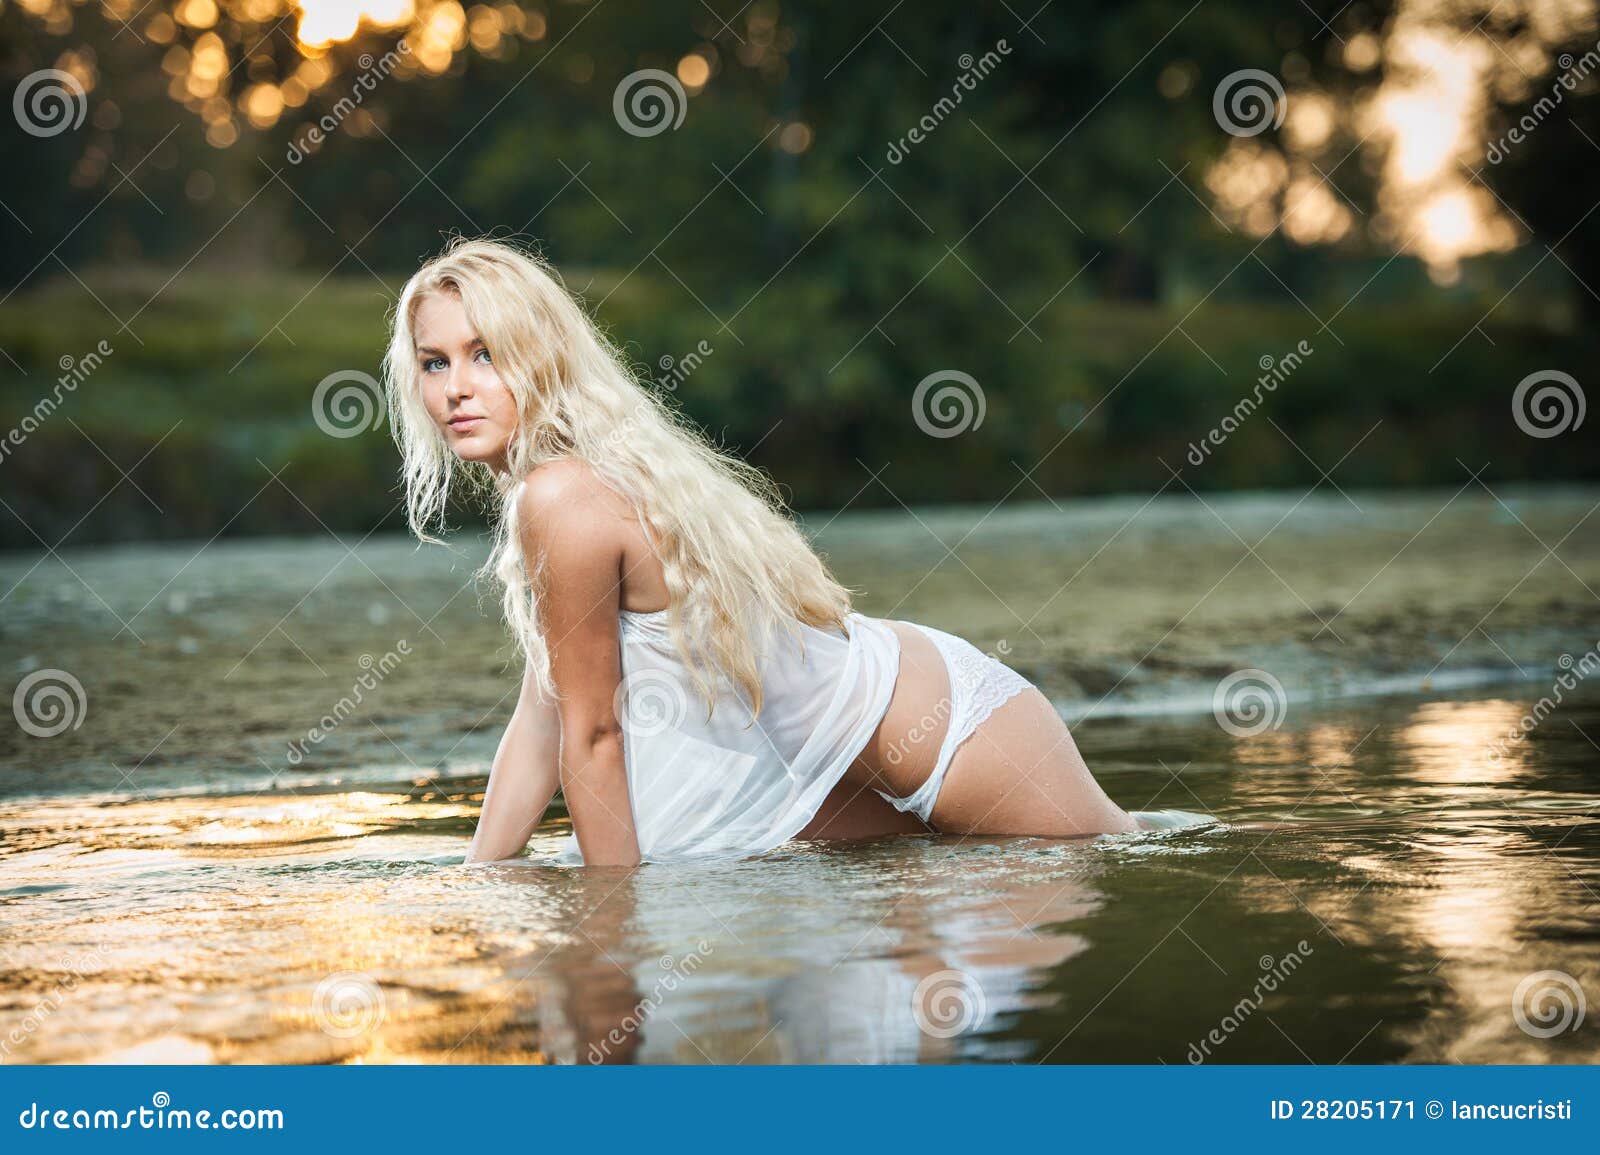 Openly Satisfy Harness Blonde Woman in Lingerie in a River Water Stock Image - Image of gorgeous,  pants: 28205171